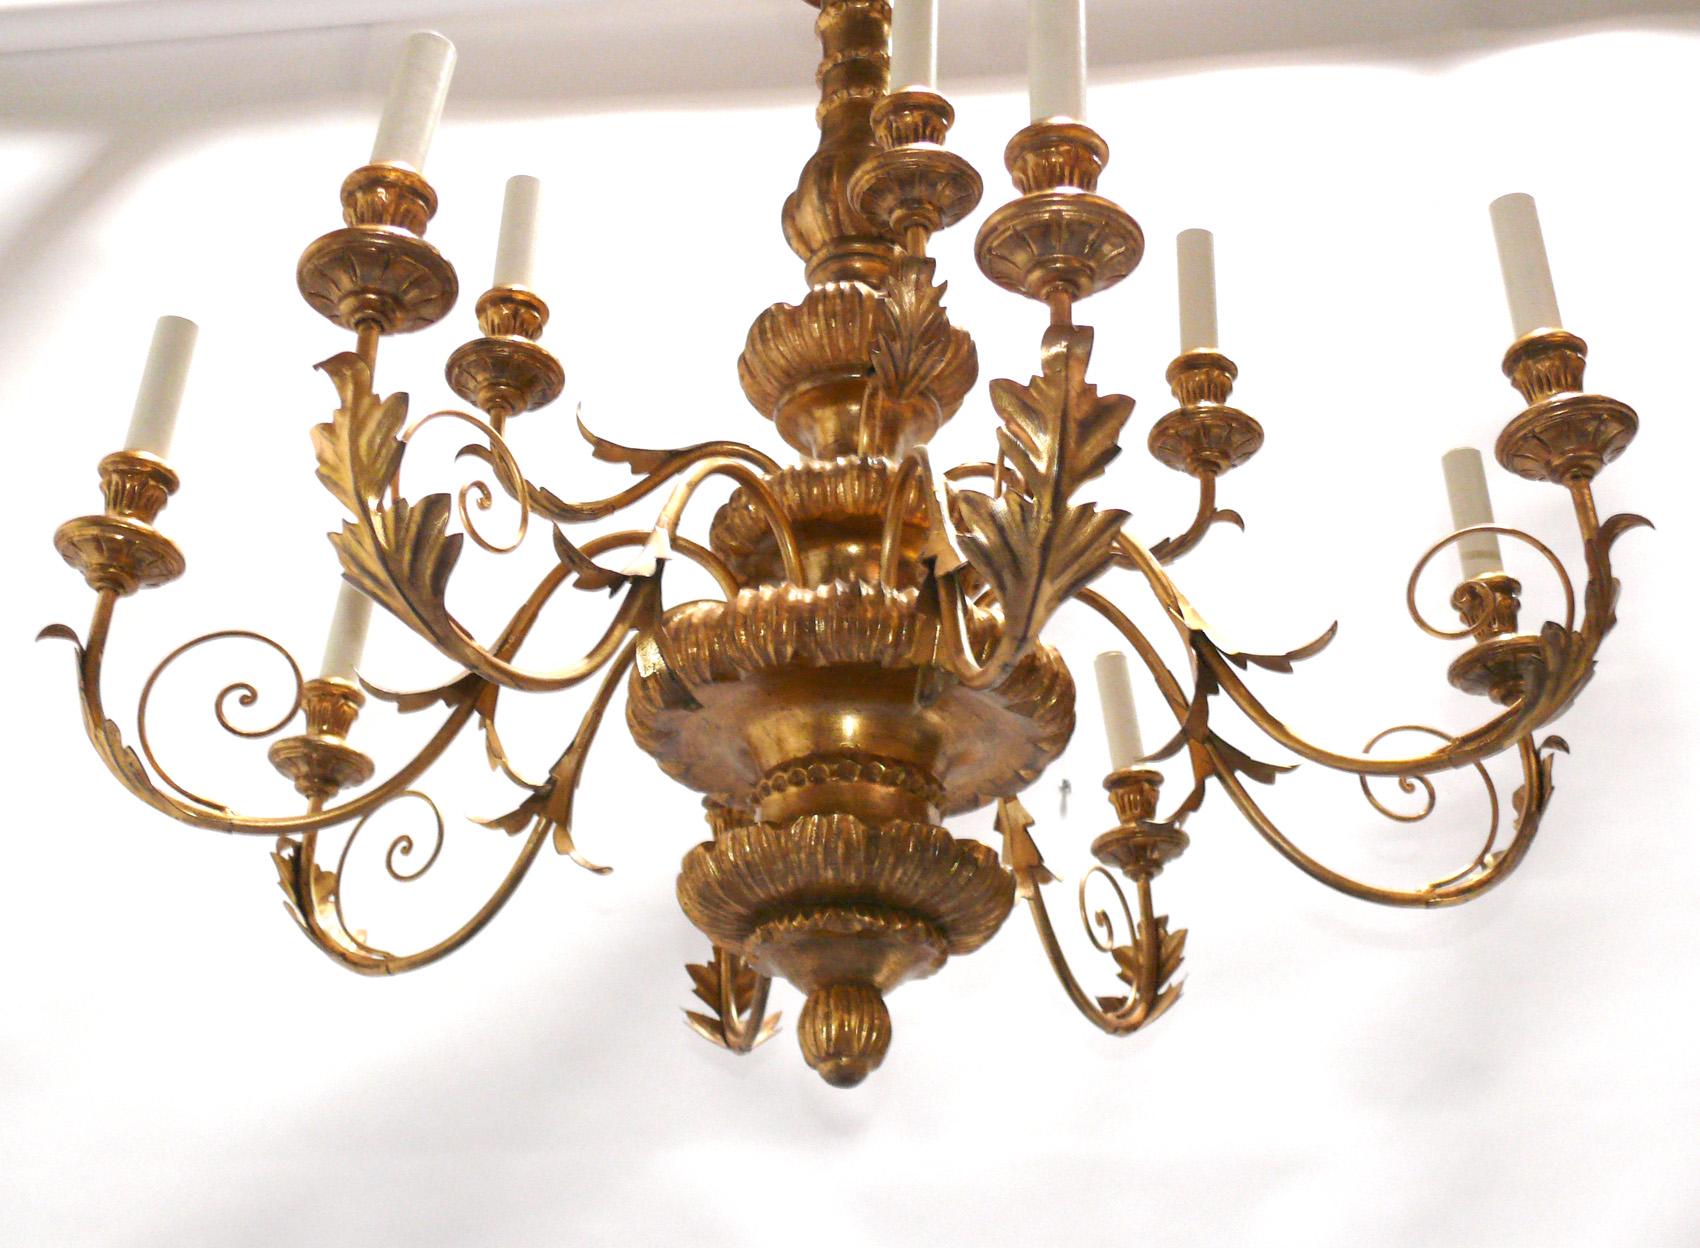 Glamorous giltwood Italian chandelier, Italian, circa 1990s. It has been rewired and is ready to mount. It measures an impressive 34.5